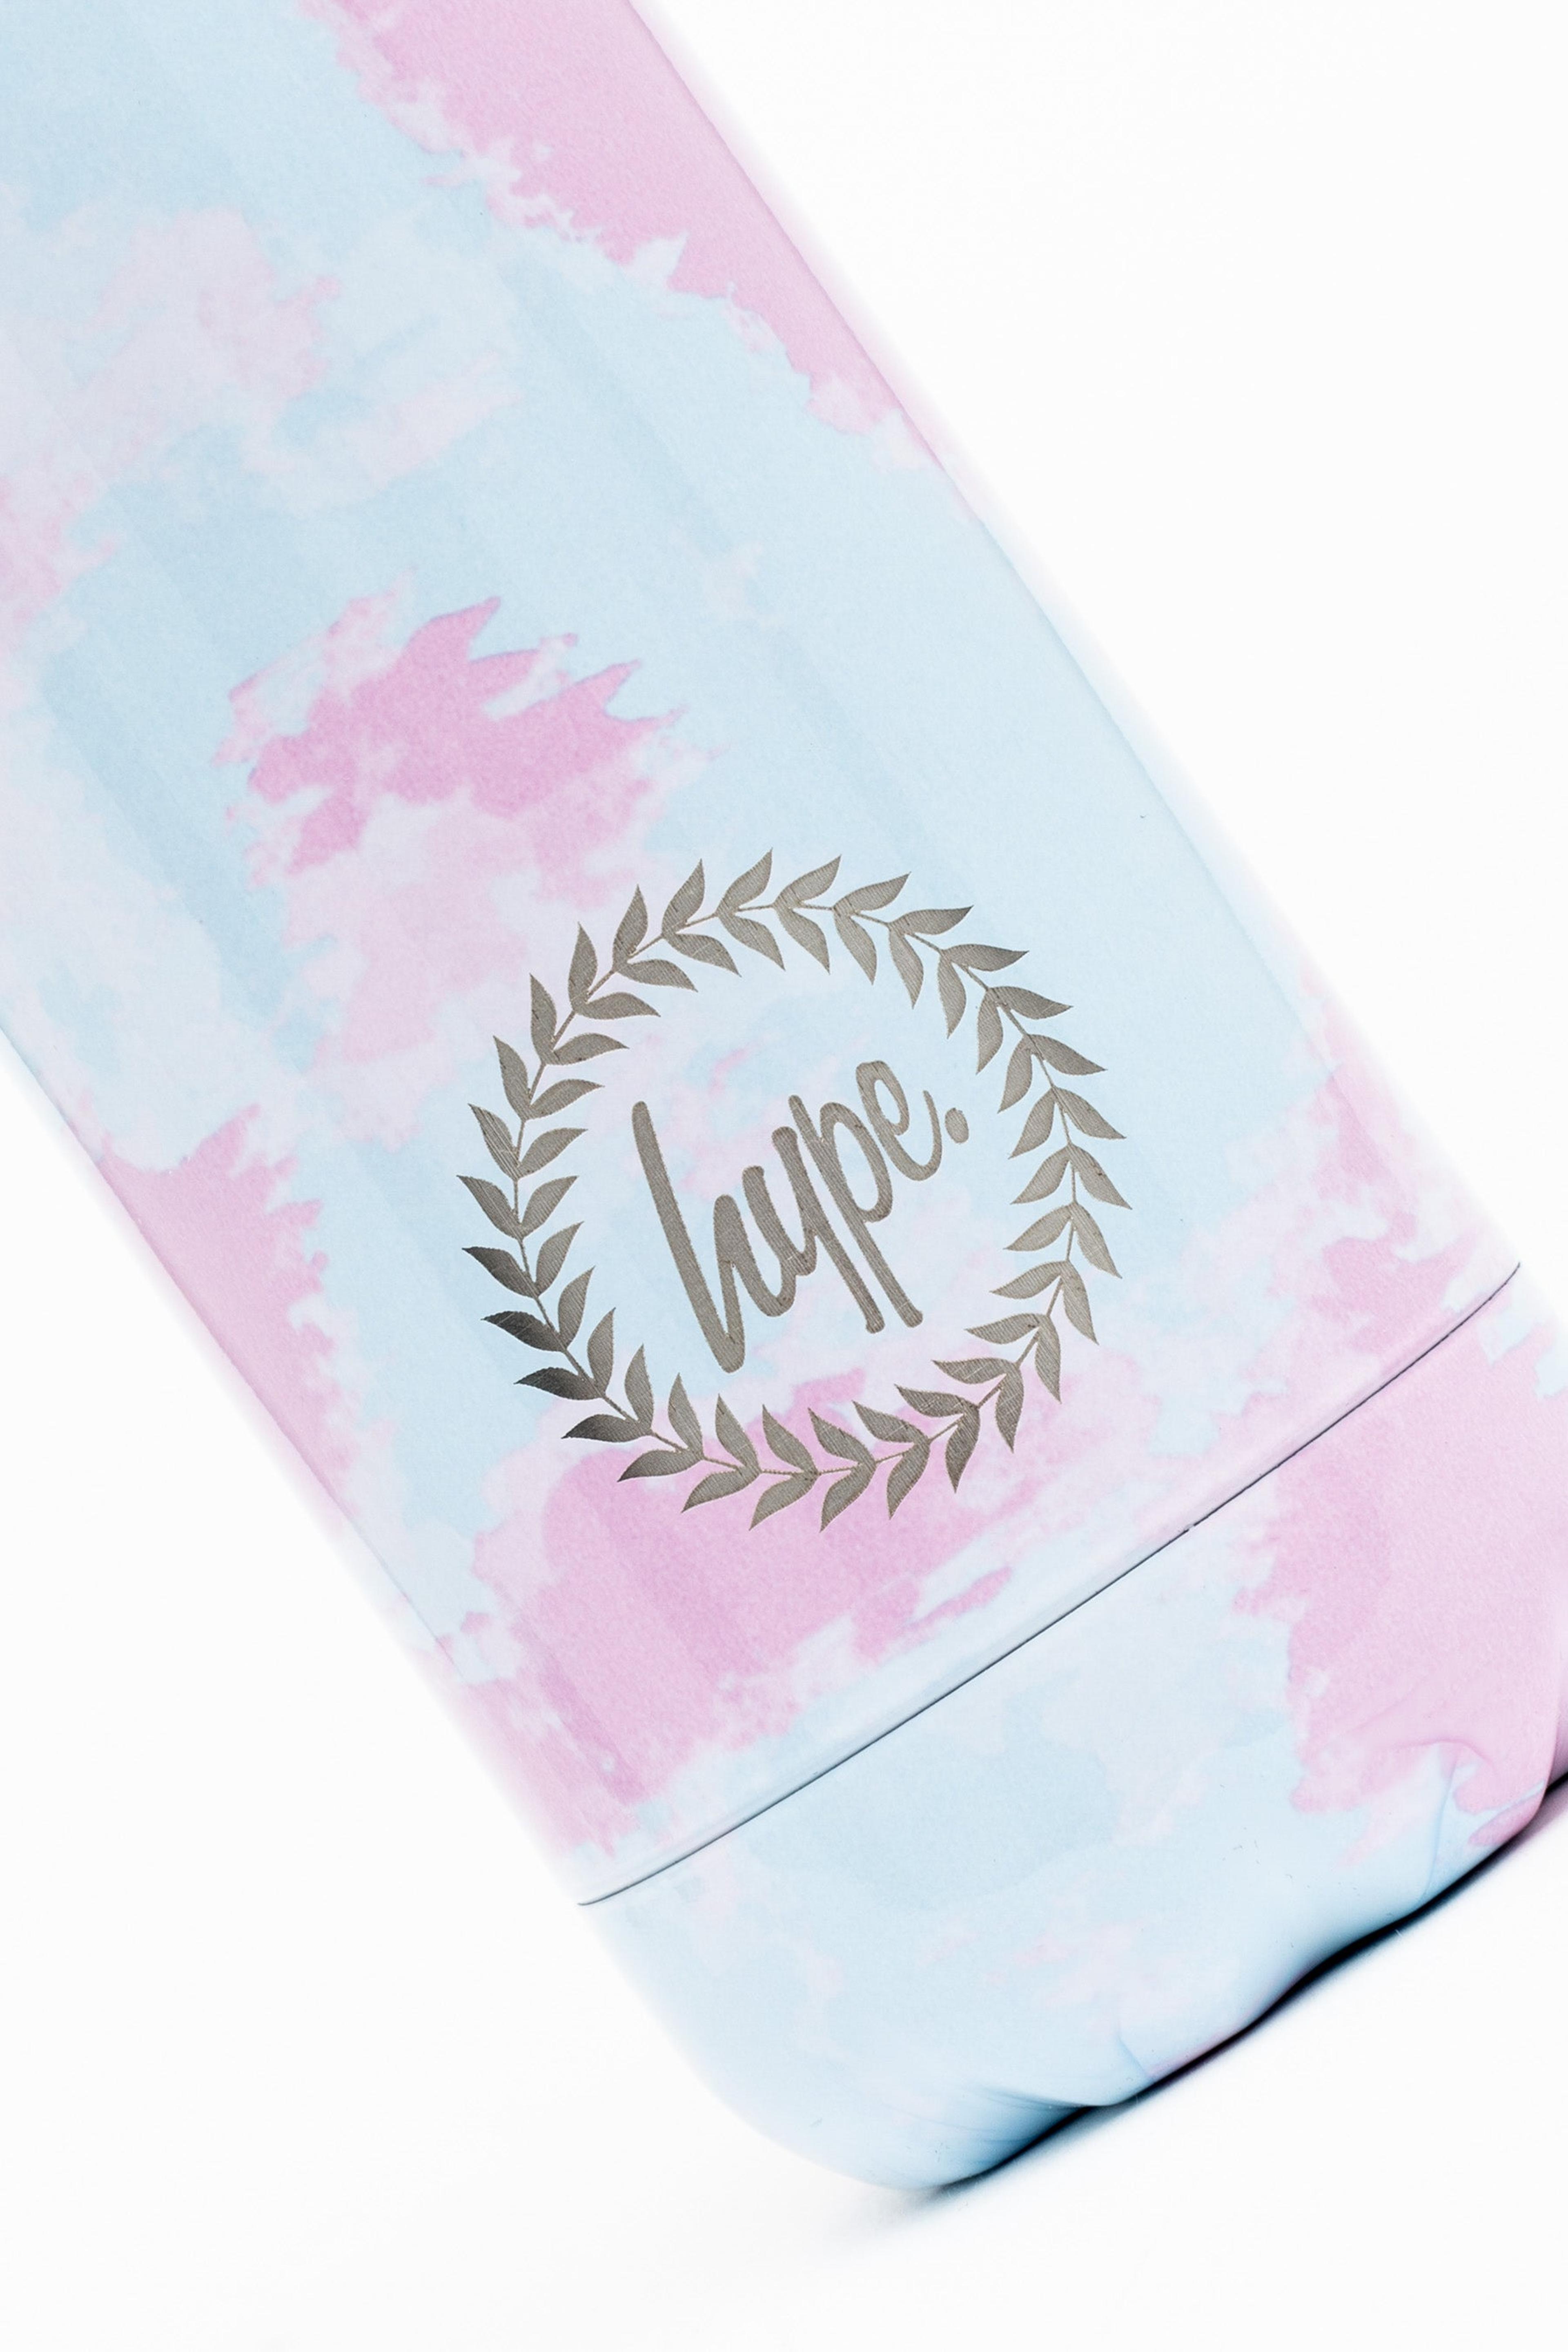 Alternate View 2 of HYPE UNISEX SPLODGE TIE DYE BLUE AND LILAC CREST BOTTLE